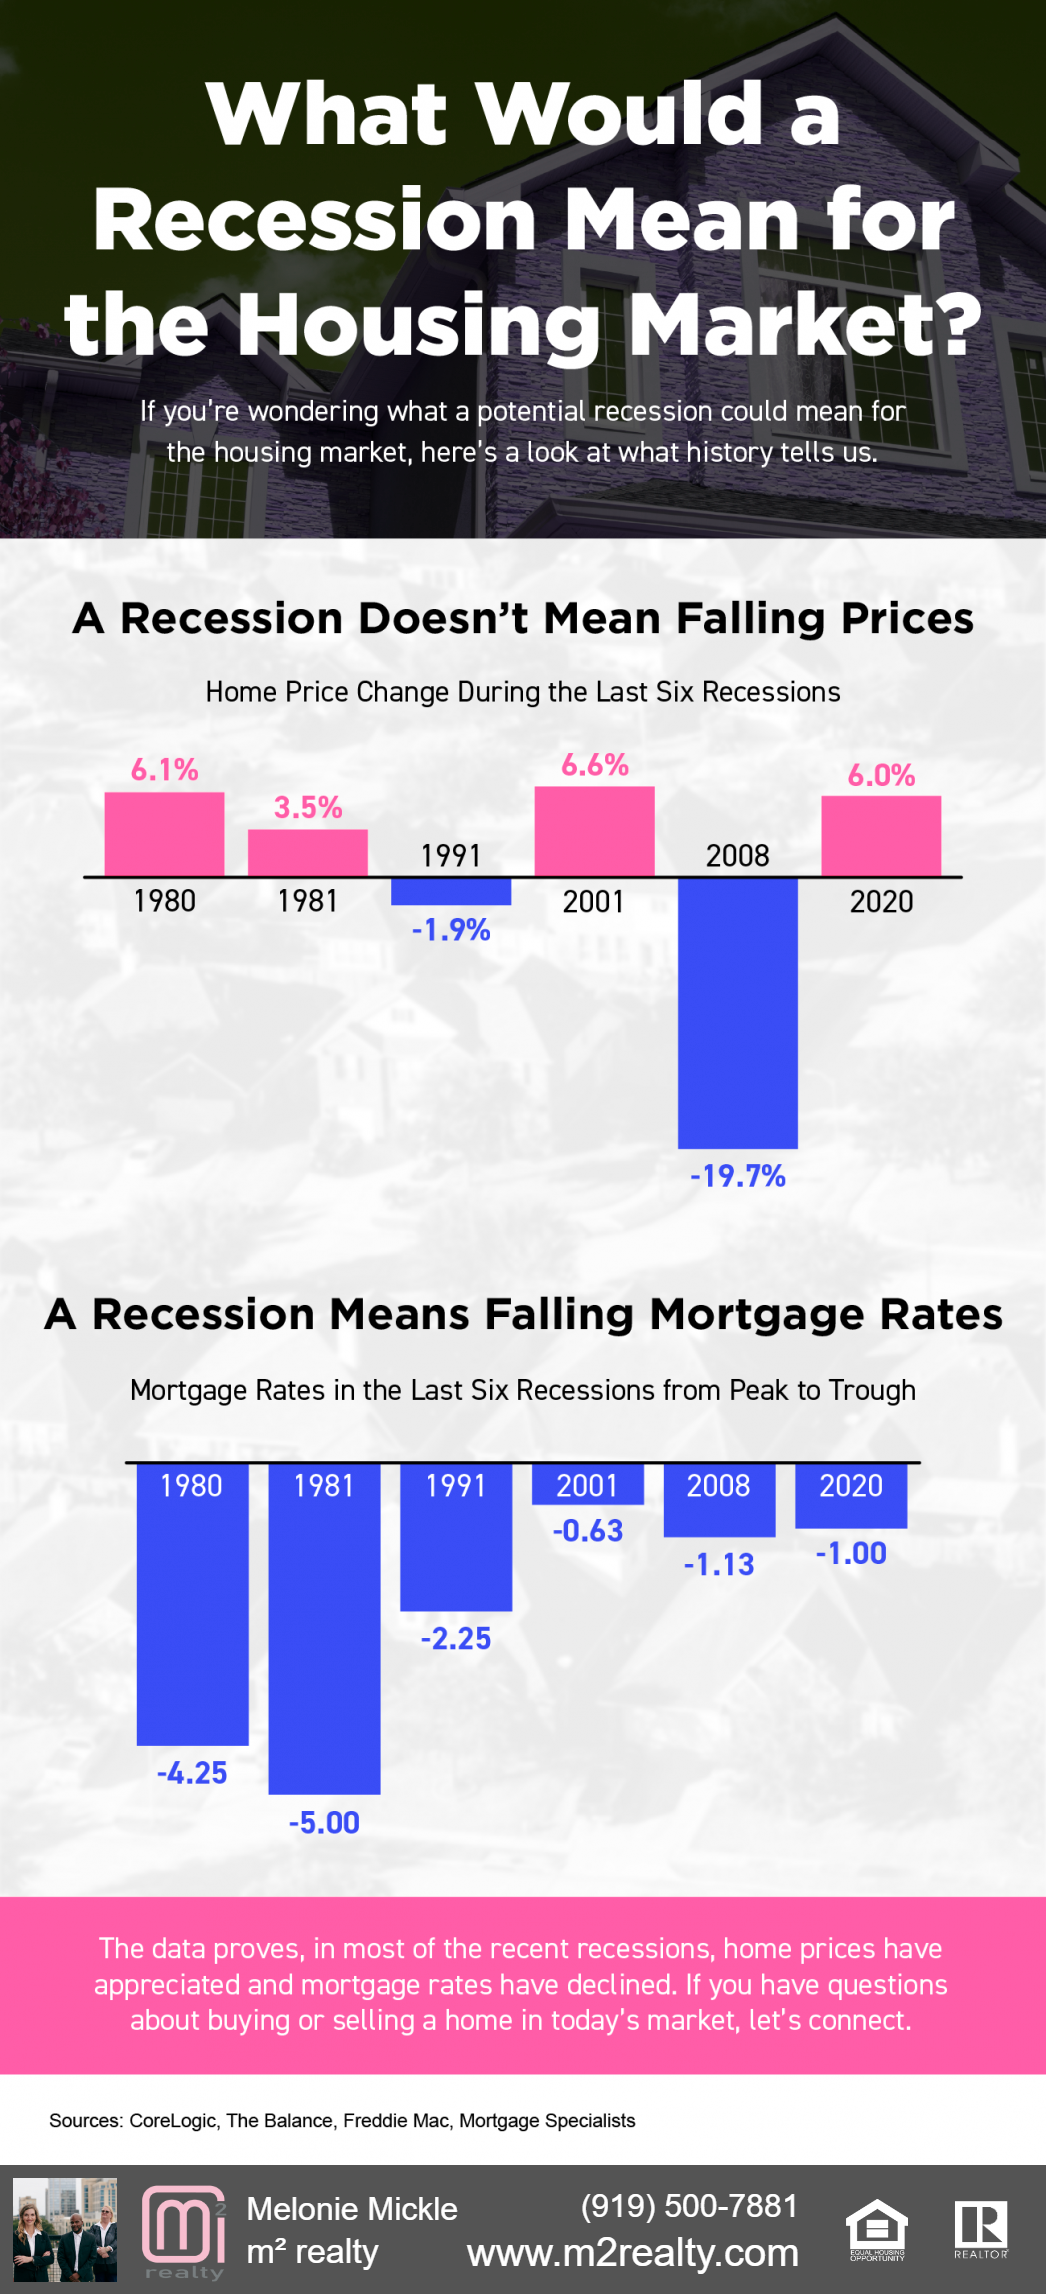 m2 realty explains what a recession means to the housing market.